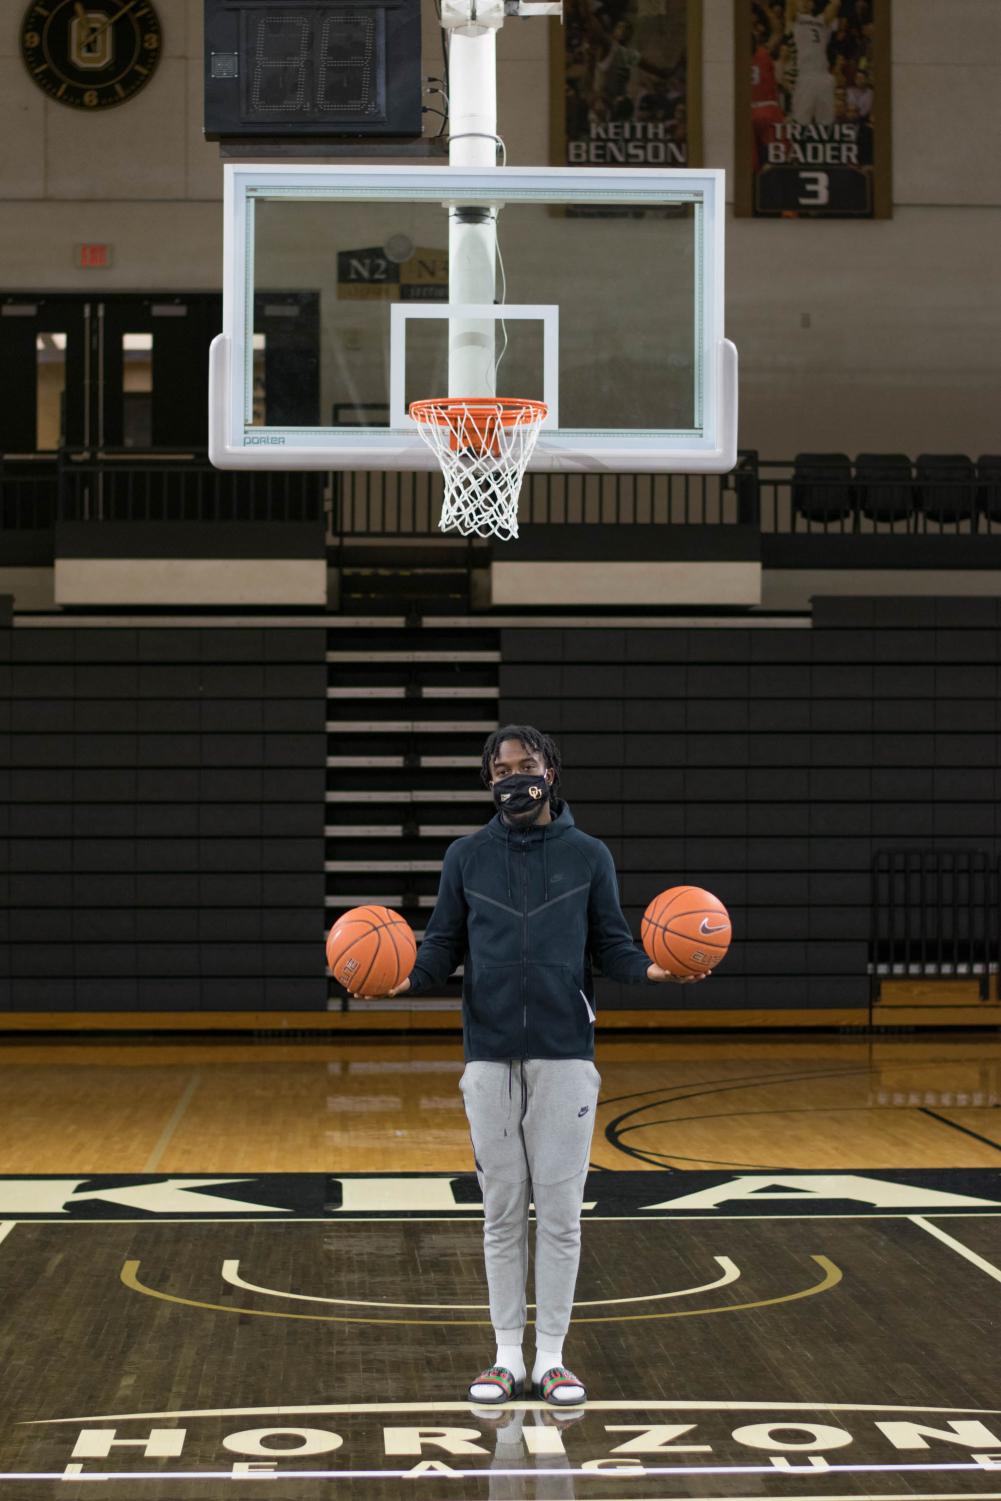 Williams, the junior guard from Detroit, posing near the free throw line in the O’Rena. Williams hit 61 3-pointers in the 15 games he played.